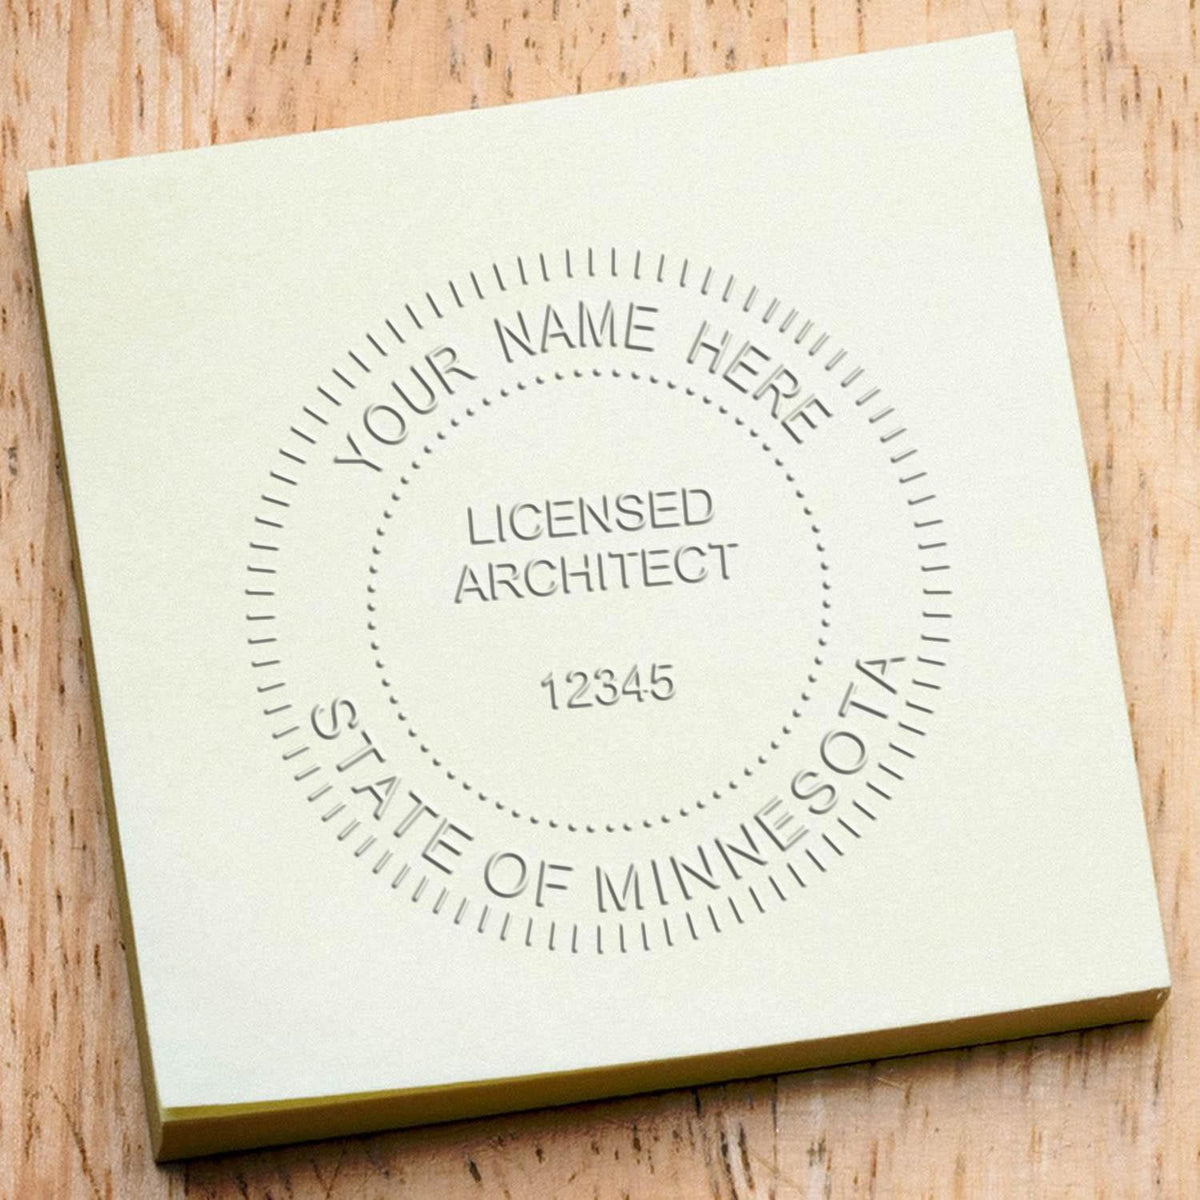 An alternative view of the State of Minnesota Long Reach Architectural Embossing Seal stamped on a sheet of paper showing the image in use